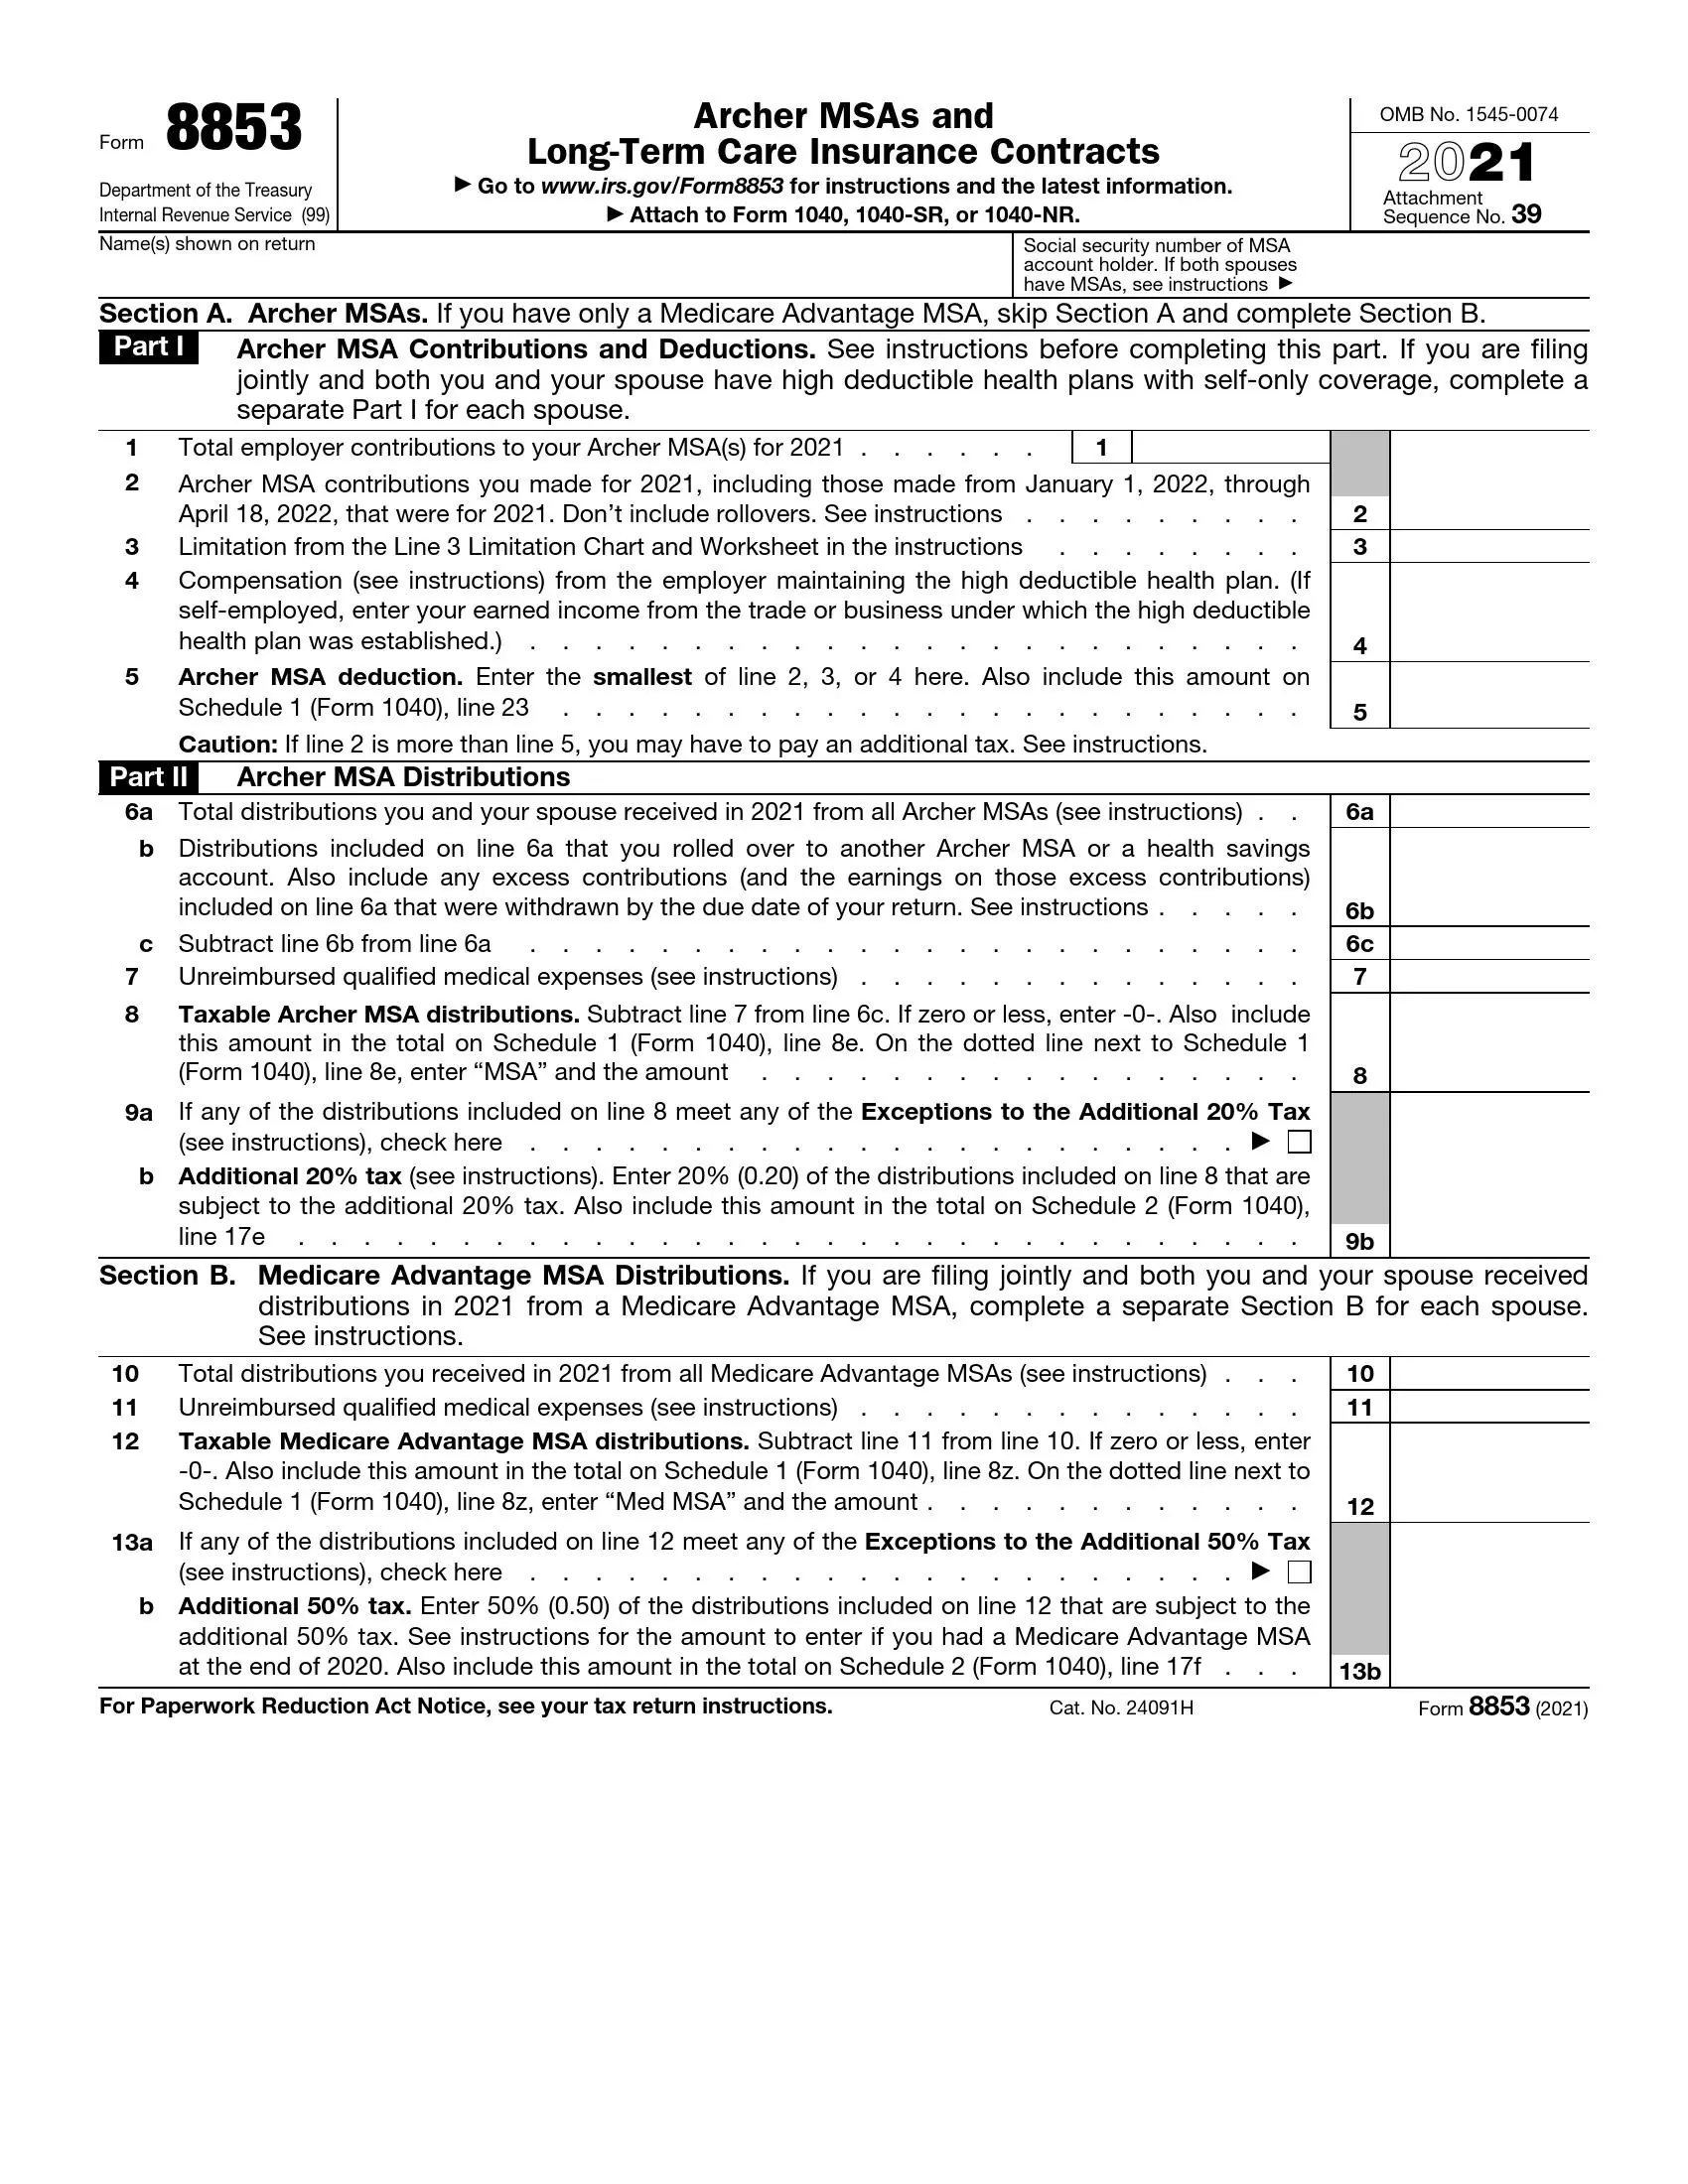 irs form 8853 2021 preview